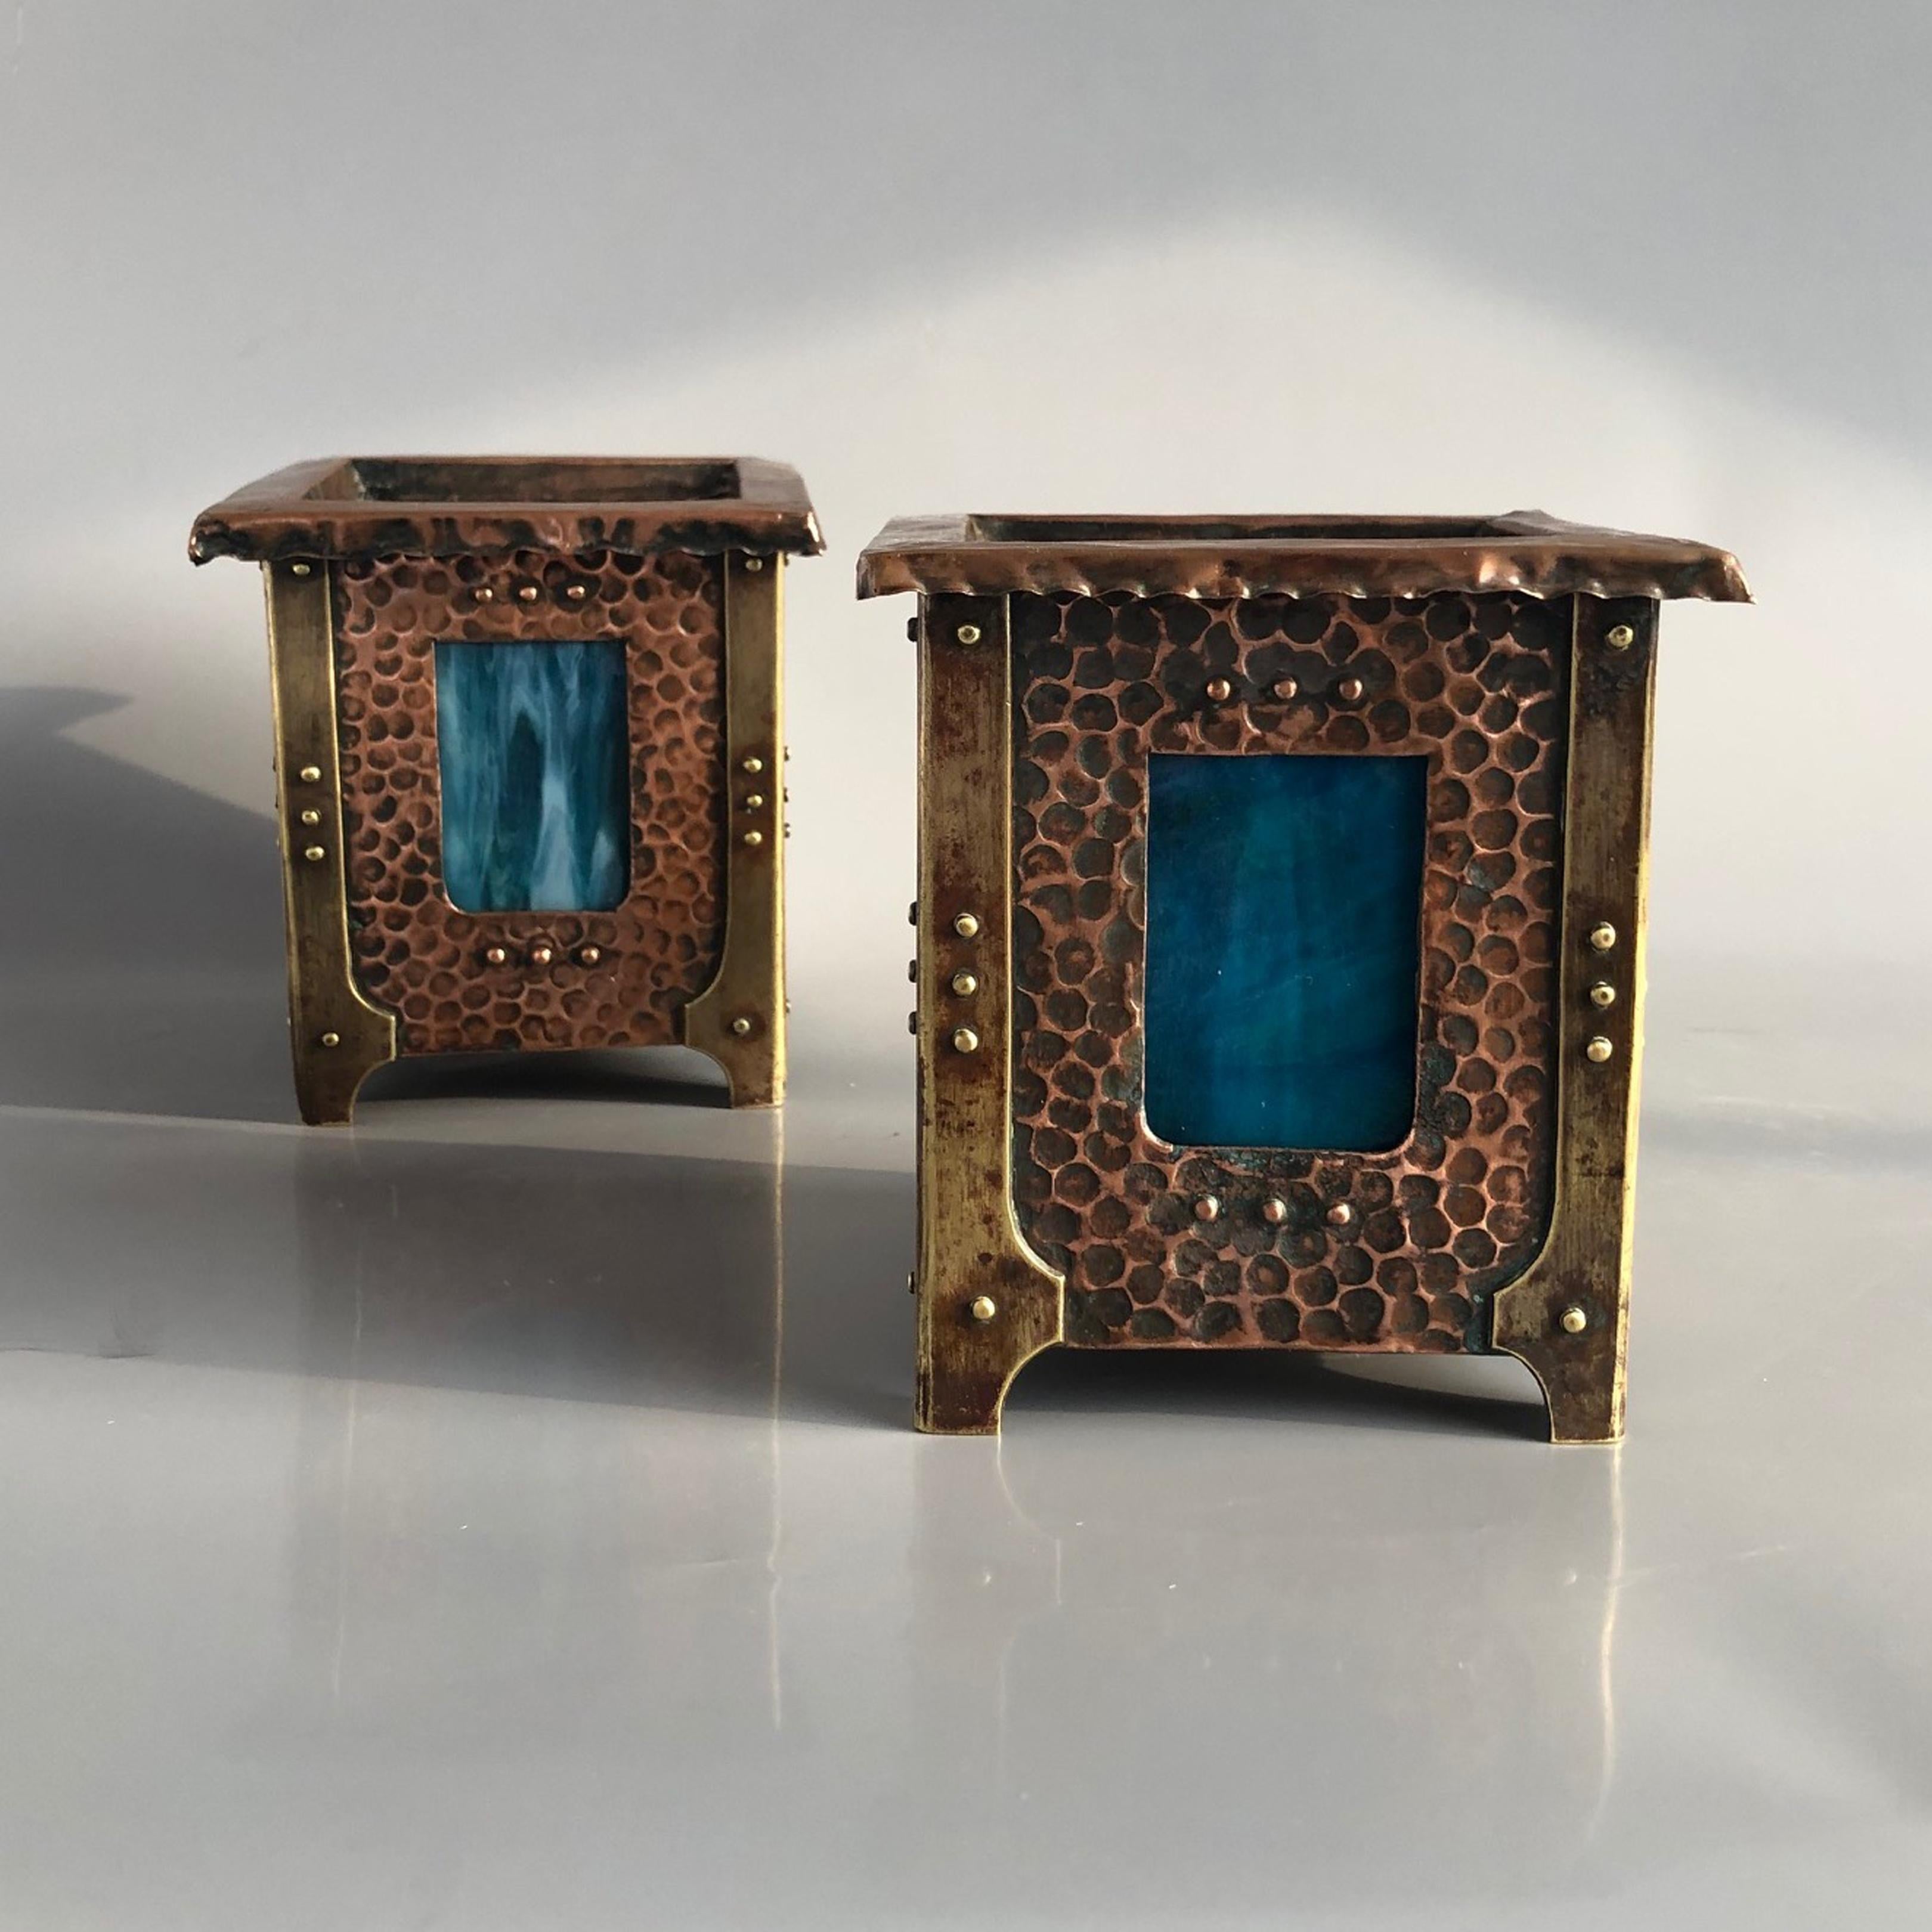 Handcrafted pair of small planters. Probably Austrian, 1900s under influence of English Arts and Crafts movement after the eighth Secession exhibition, 3 Nov - 27 Dec. 1900 when Mackintosh was invited and strongly influenced Austrian artists who